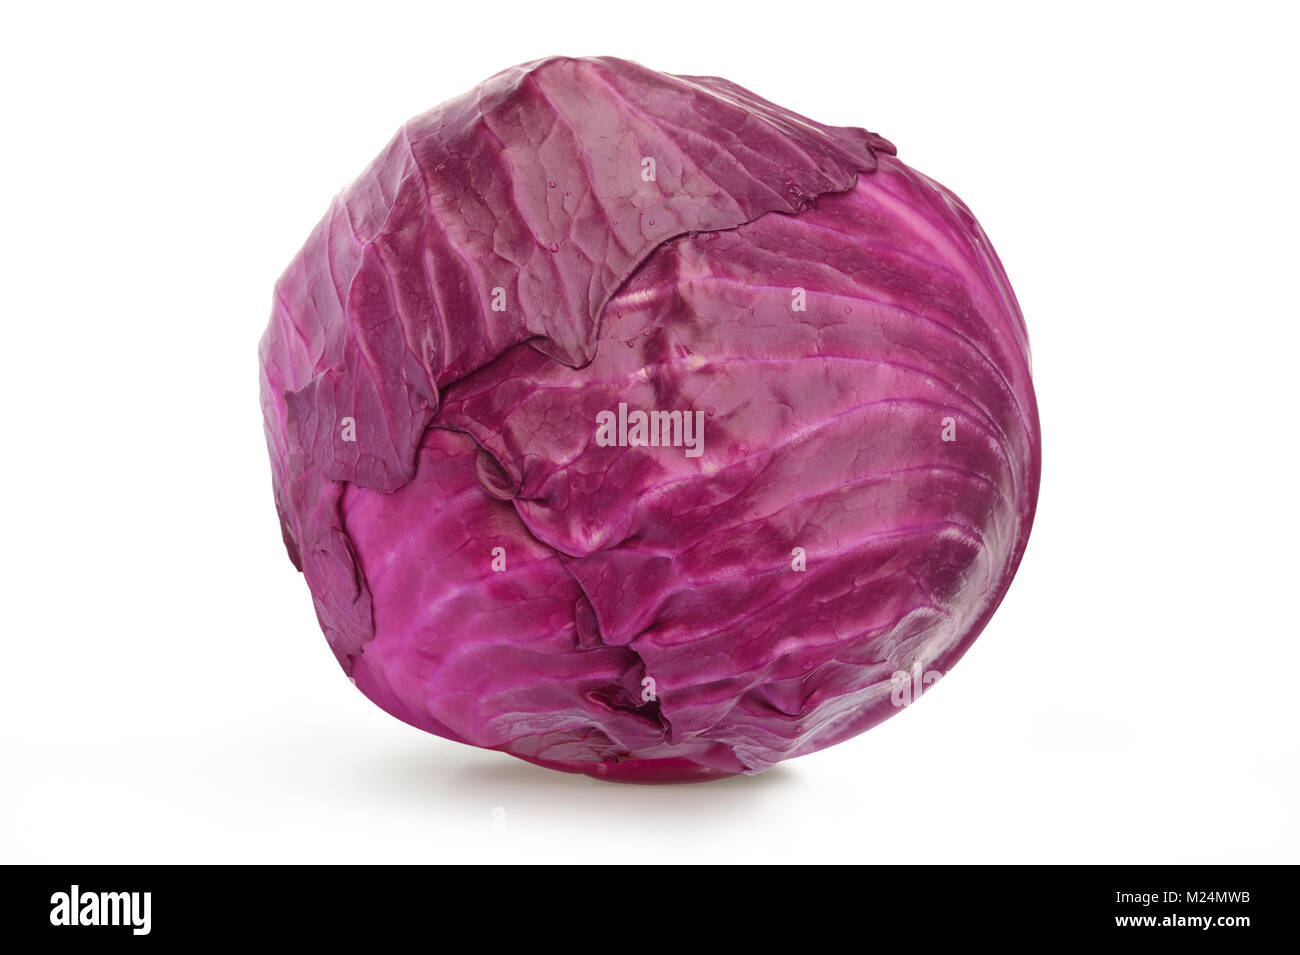 Single isolated red cabbage. Vegetable food ingredient. Stock Photo